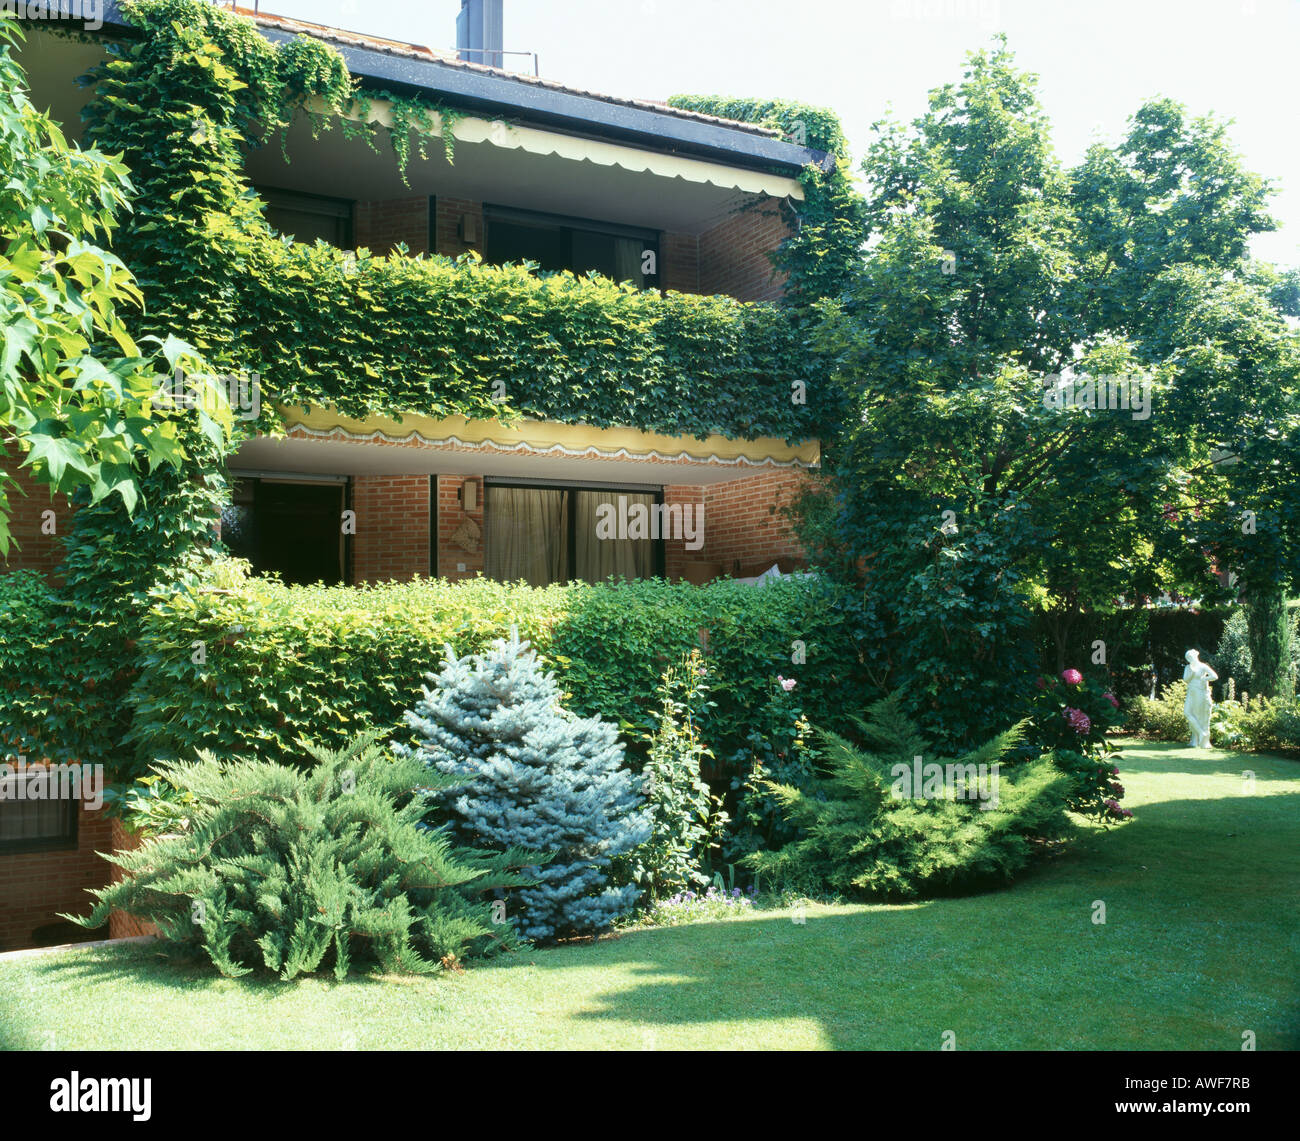 Low brick built house with ivy covered balconies in a sunny garden with lawns and dwarf conifers Stock Photo